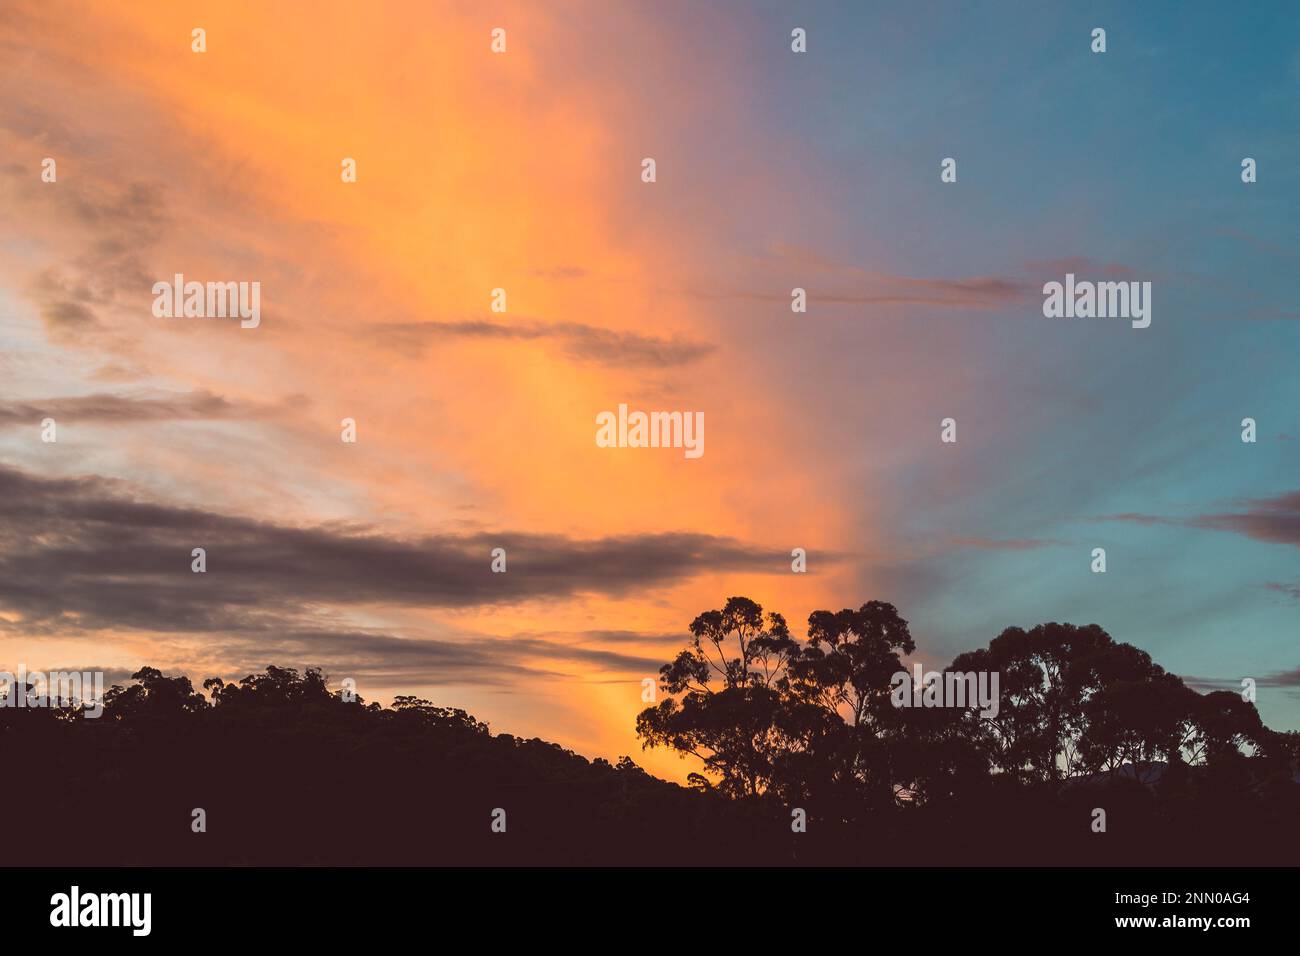 autumn sunset sky with orange beautiful clouds over the hills of Tasmania with eucalyptus gum trees silhouettes Stock Photo